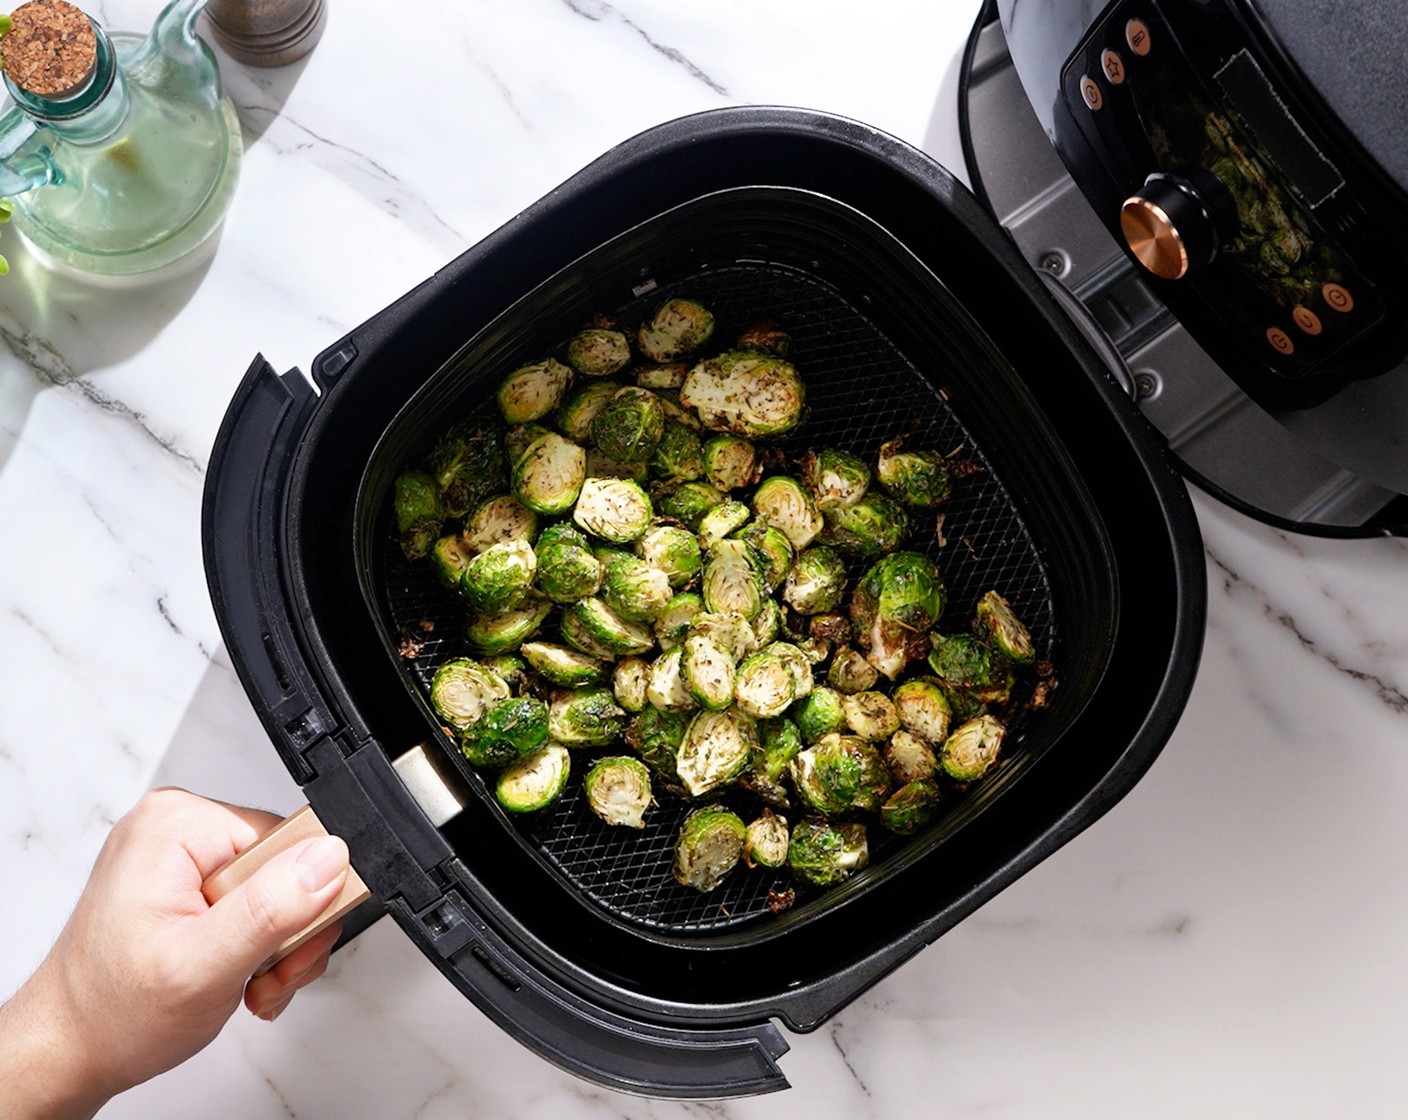 step 2 Place the brussels sprouts in the air-fryer basket and air fry at 350 degrees F (180 degrees C) for 6-8 minutes. You may need to cook them in batches if they don't all fit.